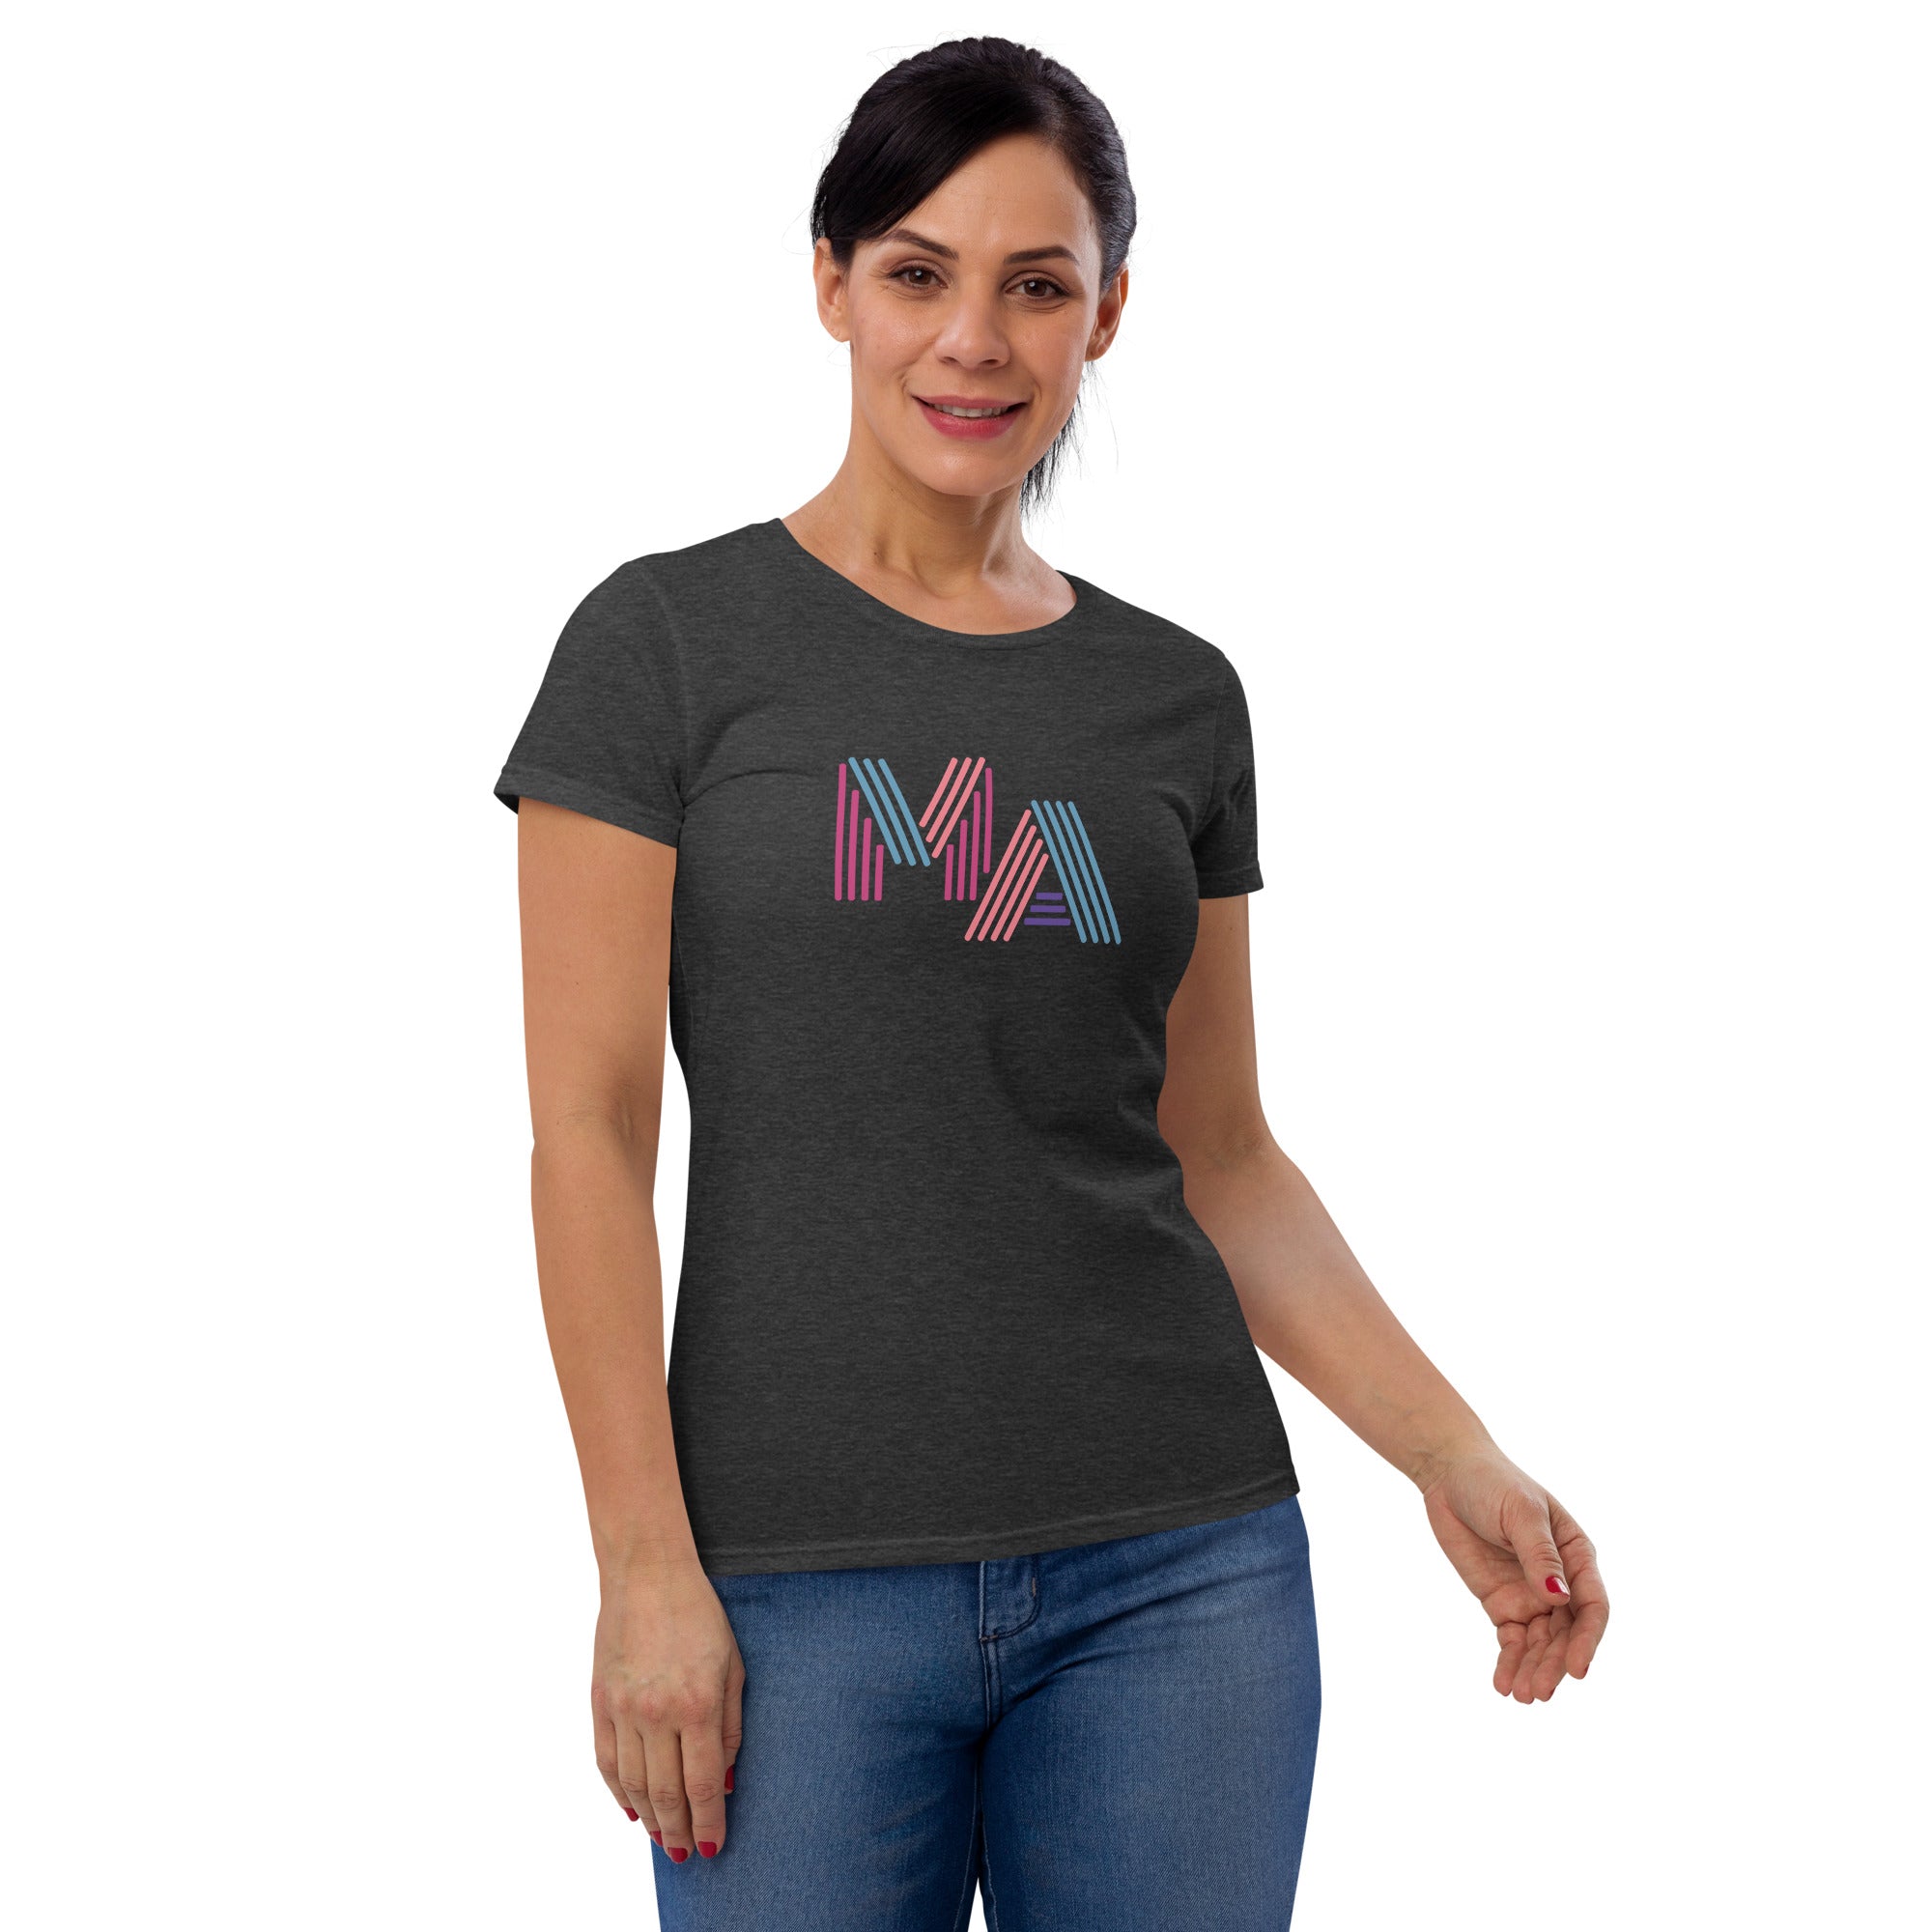 photo of woman wearing dark grey t-shirt with the letters MA in pink, orange, turquoise and purple neon light style lettering